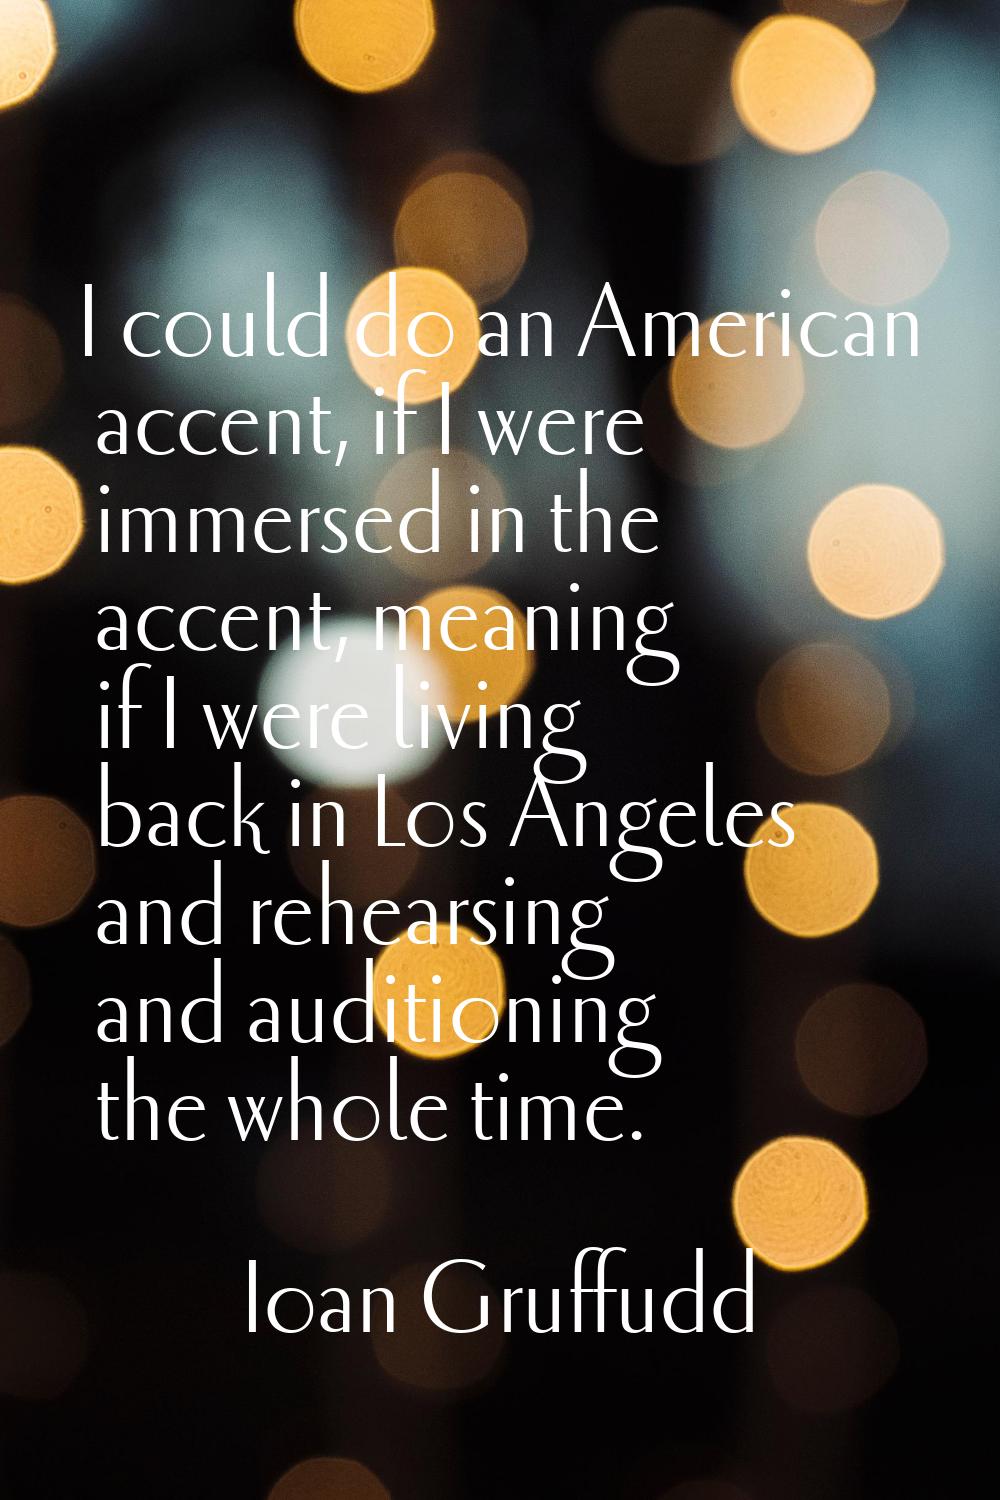 I could do an American accent, if I were immersed in the accent, meaning if I were living back in L